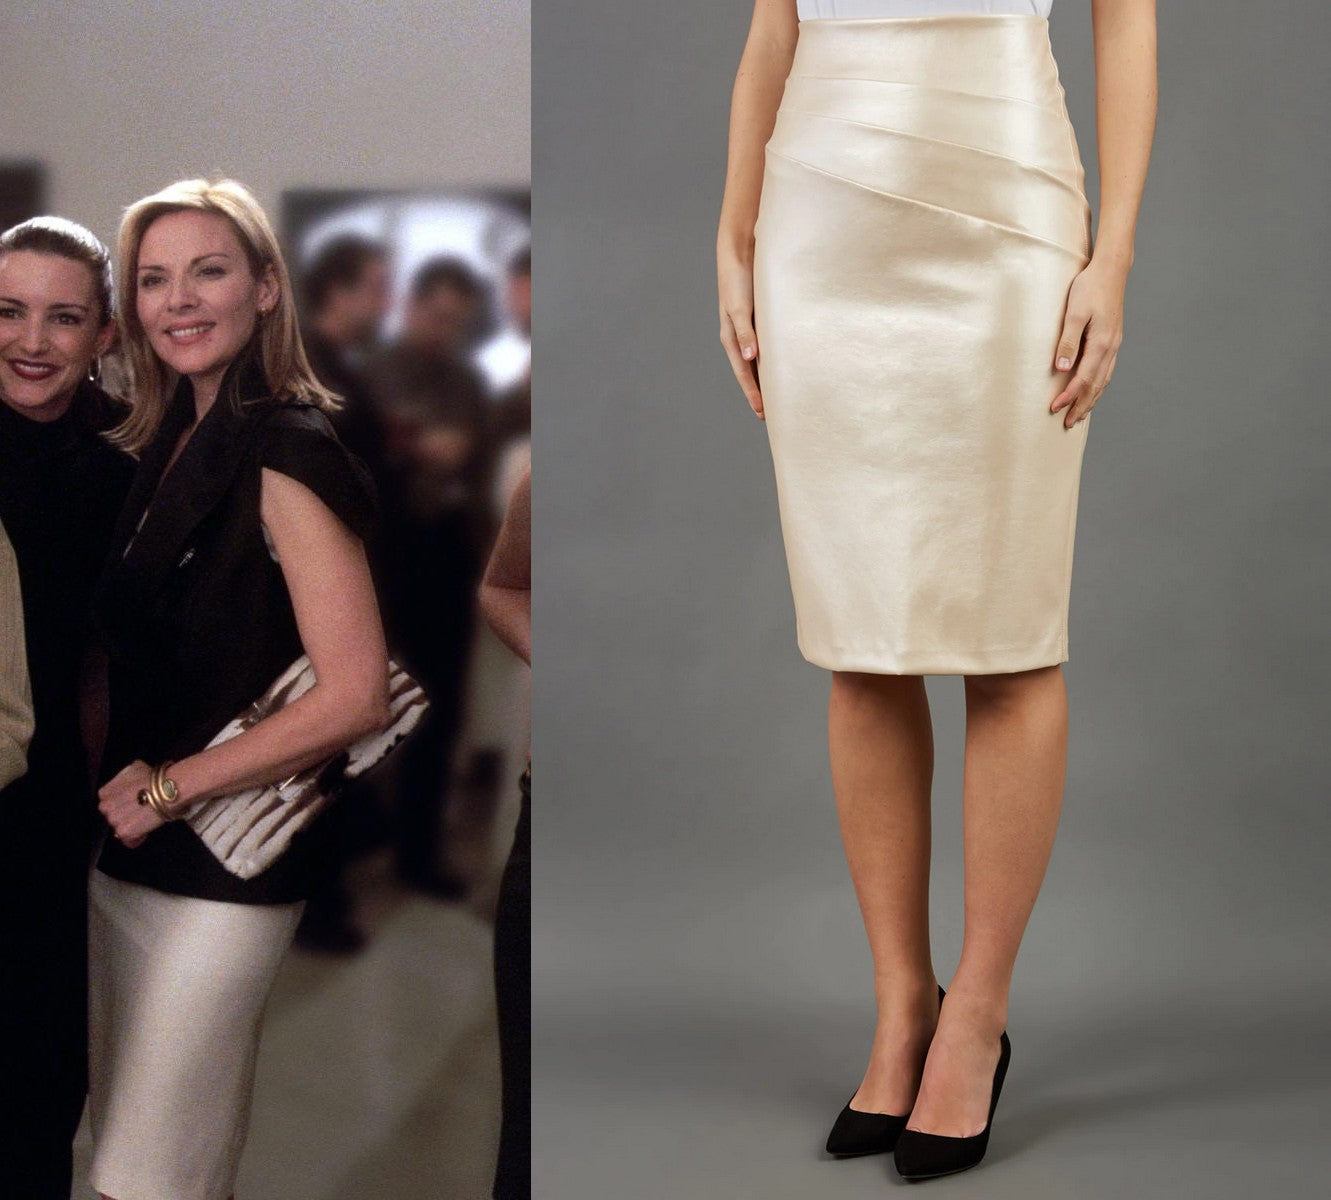 samantha jones pictured wearing a black top and pearl skirt - attached is Diva Catwalks Mother of Pearl [shade] Faux Leather Skirt.